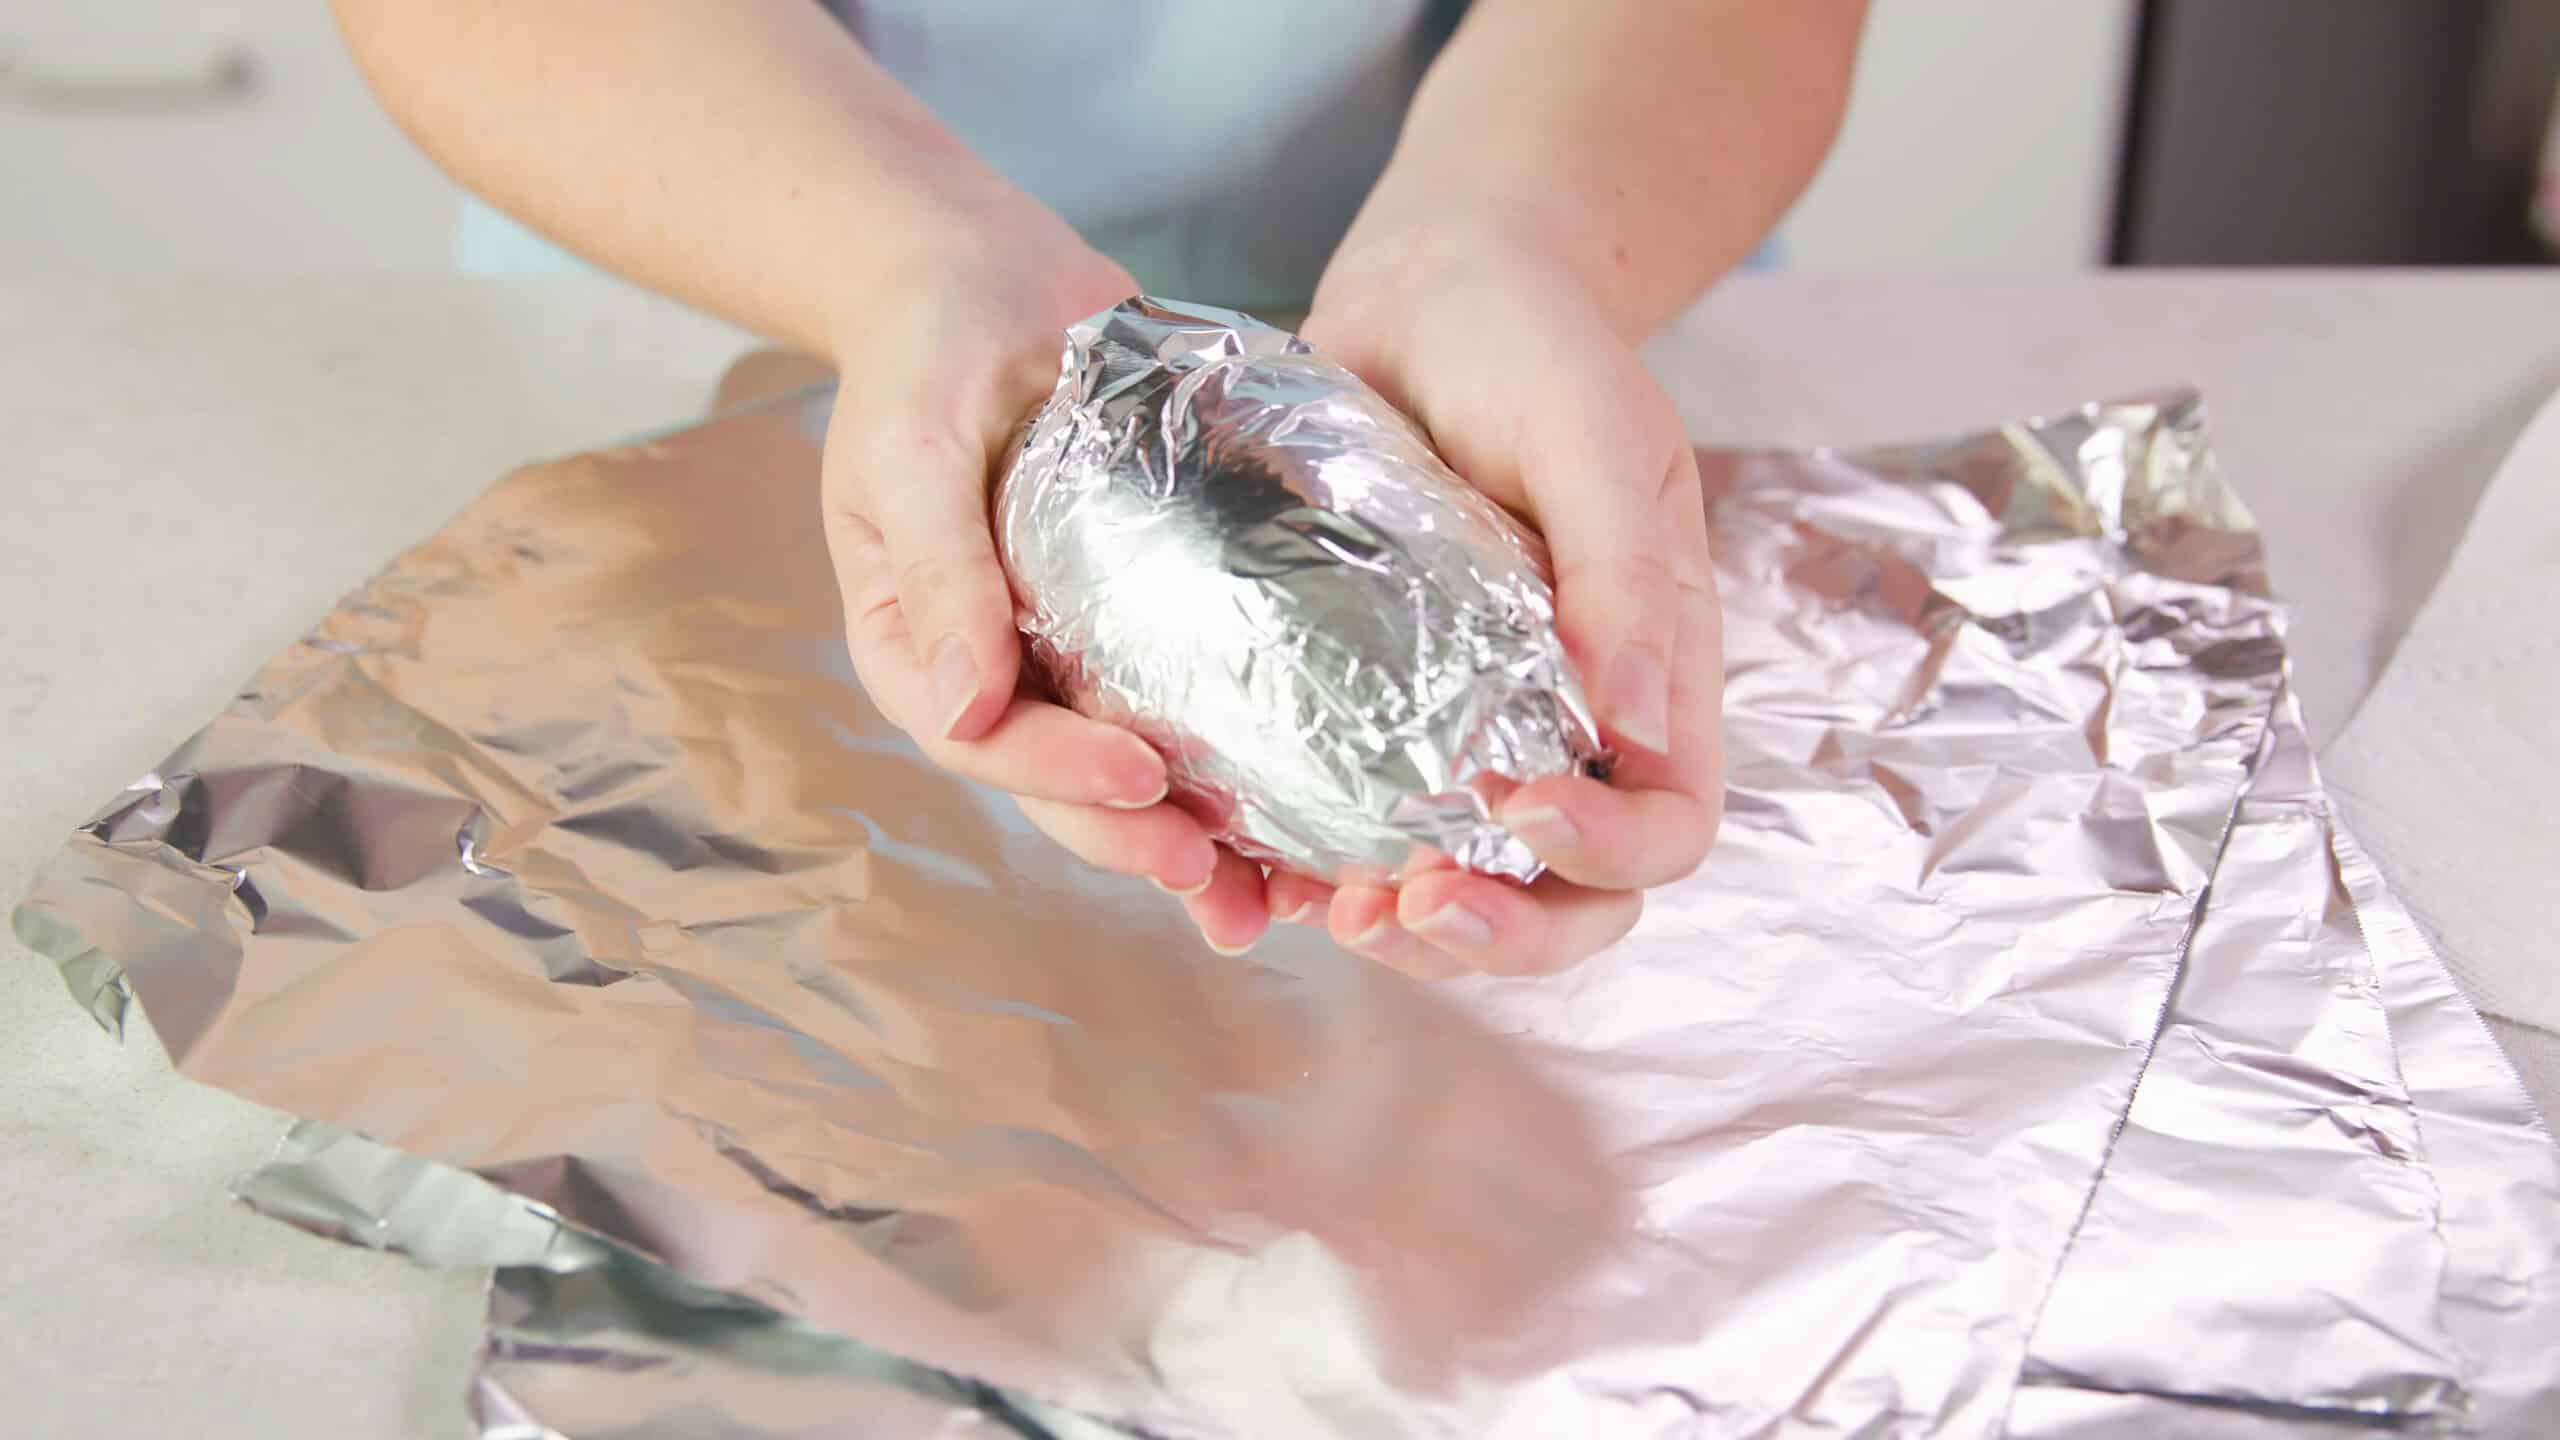 Roll each of the sweet potatoes into aluminum foil squares.